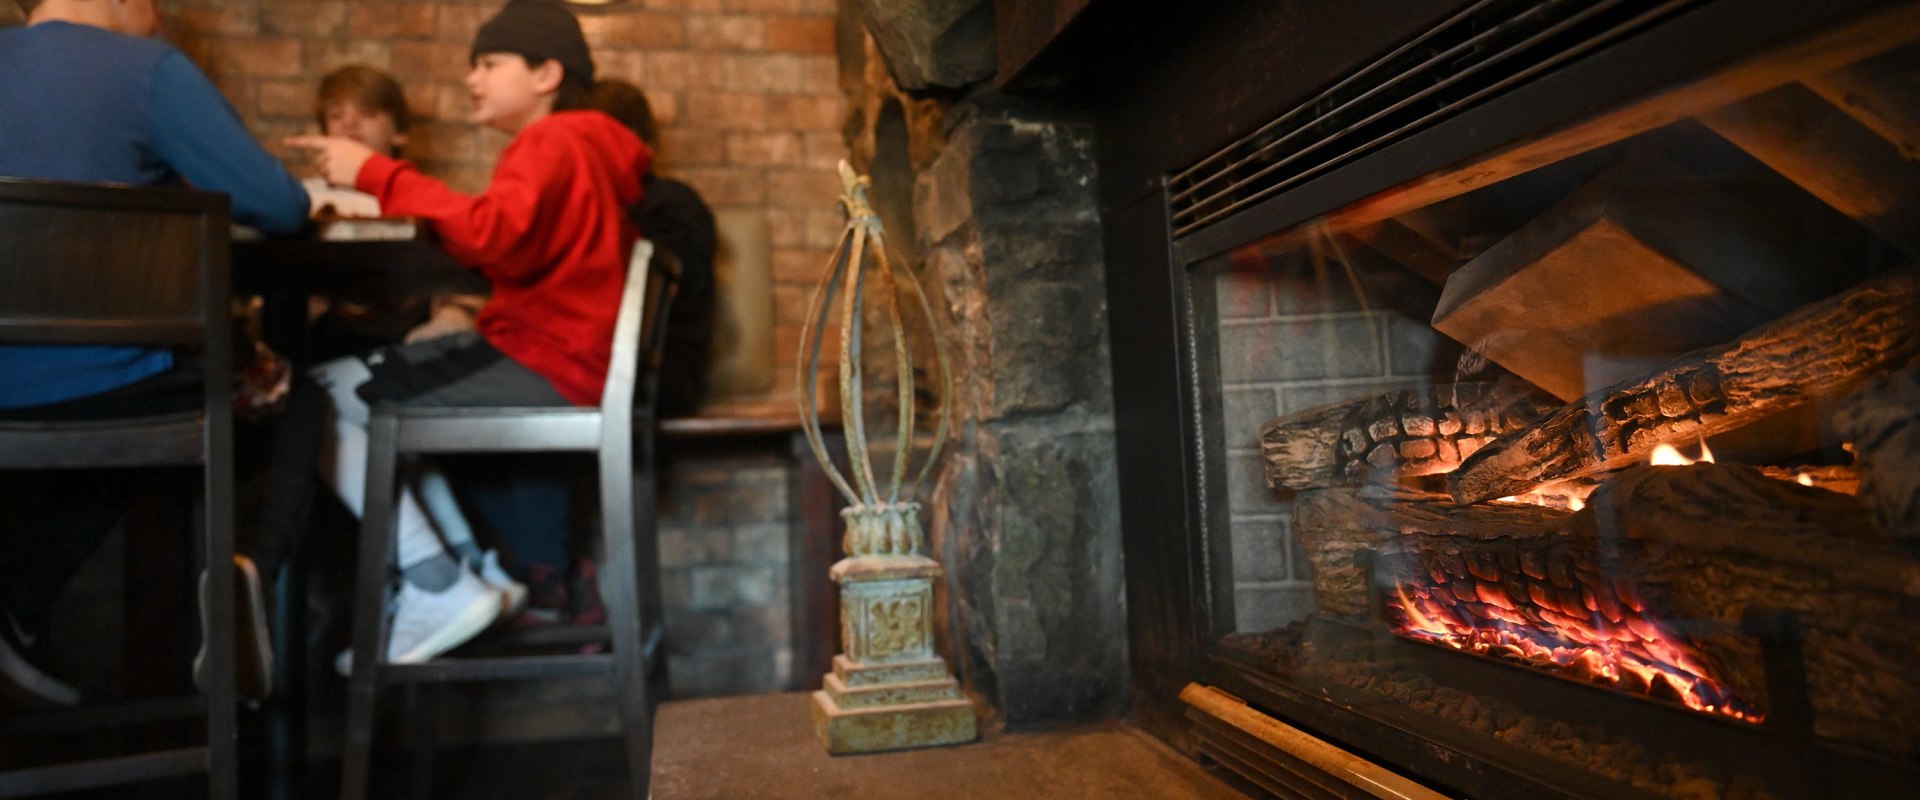 The Best Restaurants in Eastern MA with Fireplaces and Outdoor Fire Pits